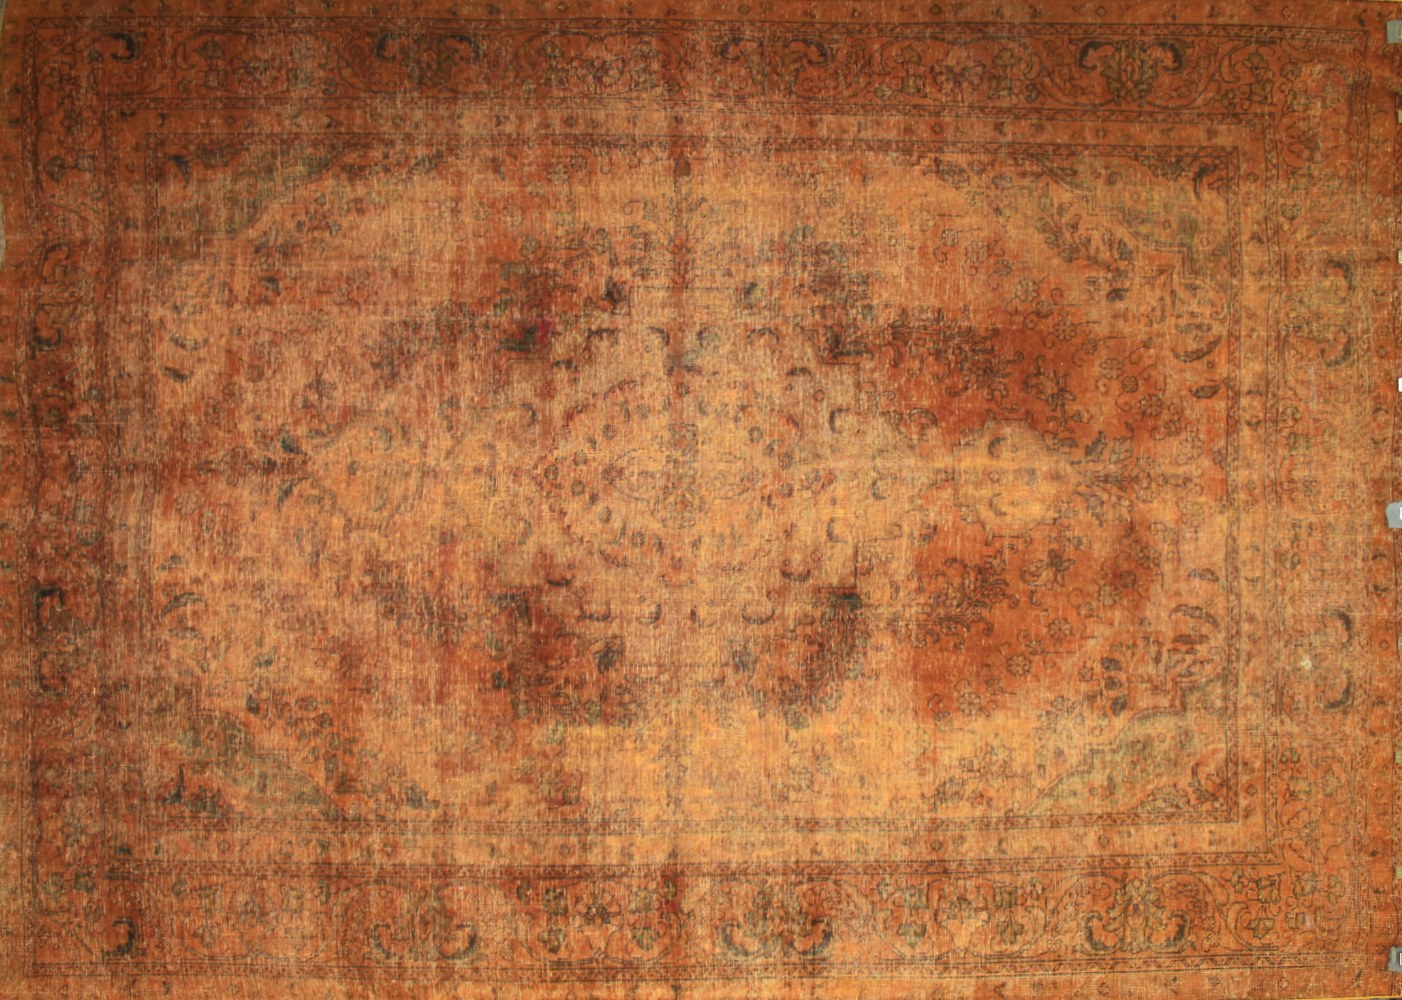 9x12 Vintage Hand Knotted Wool Area Rug - MR18422